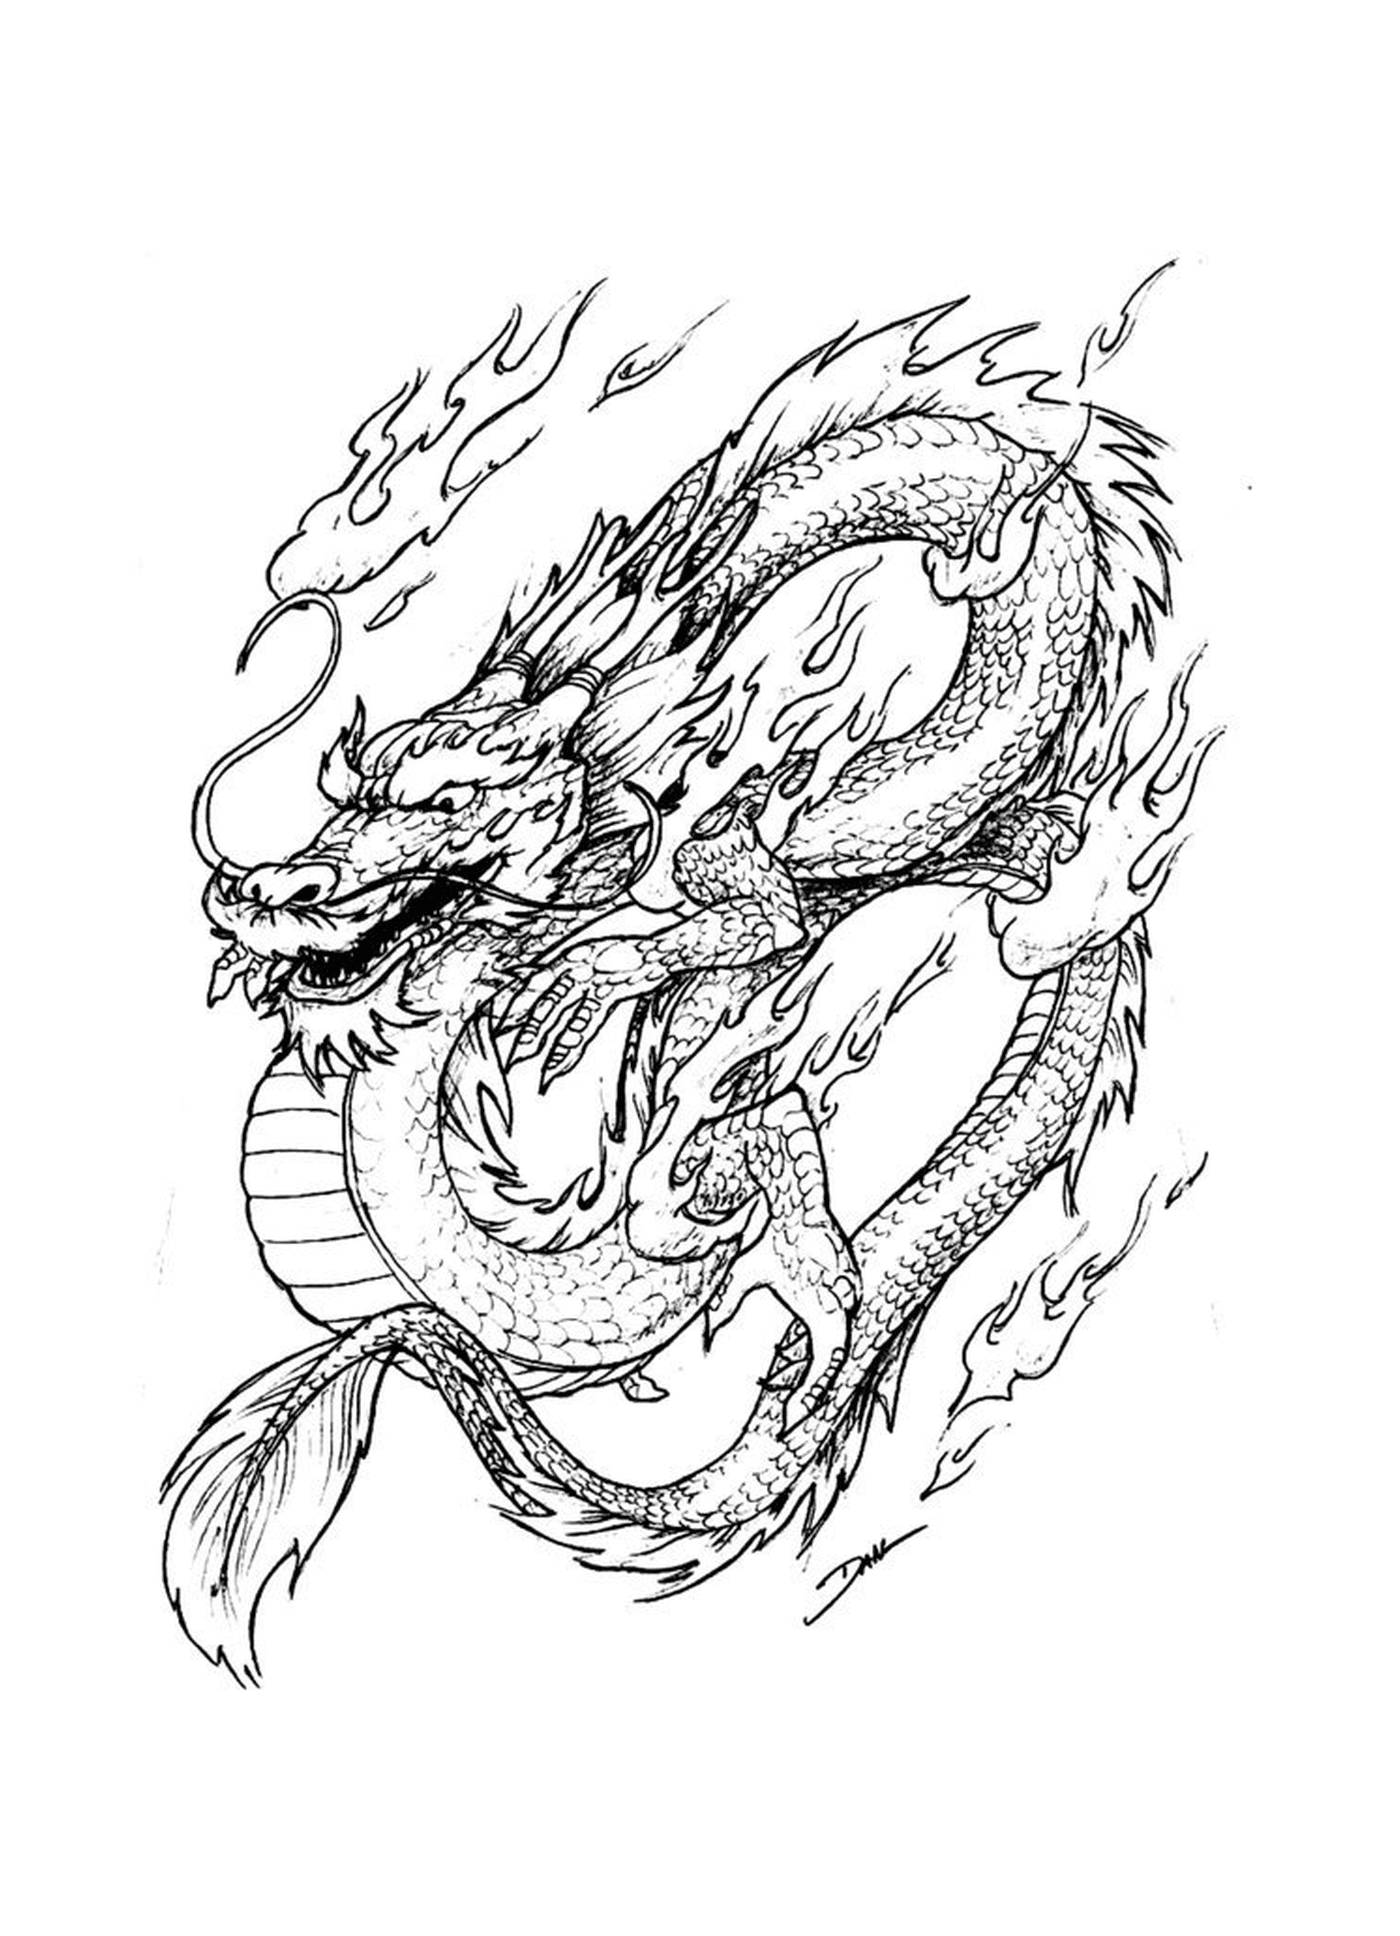  An oriental dragon inflamed, symbol of strength and passion 